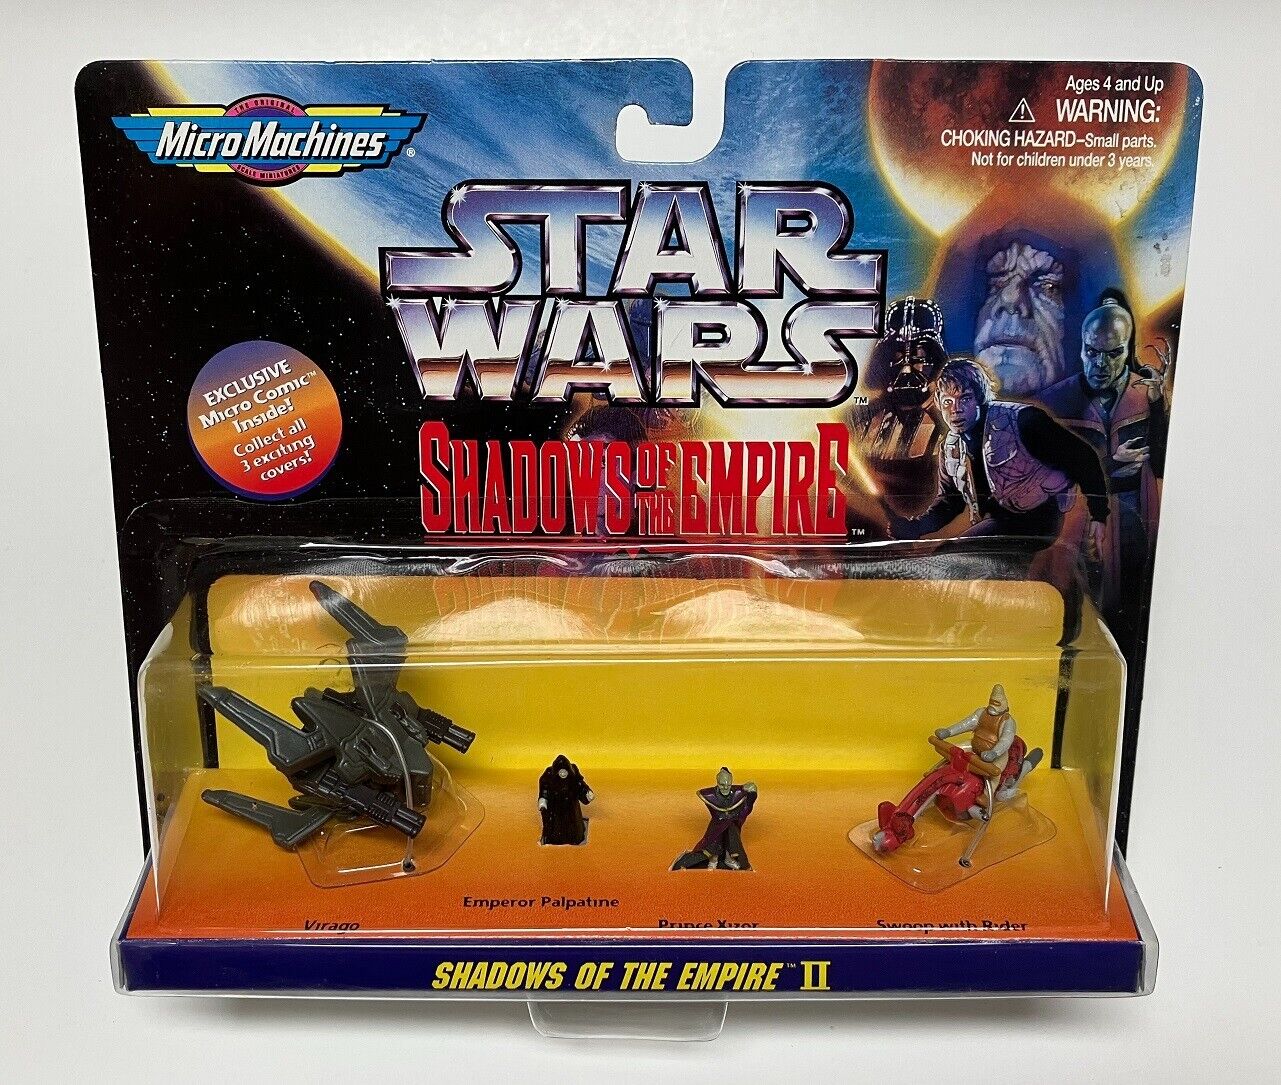 NEW (Vintage) Micro Machines Star Wars SHADOWS OF THE EMPIRE Collection 2 Pack